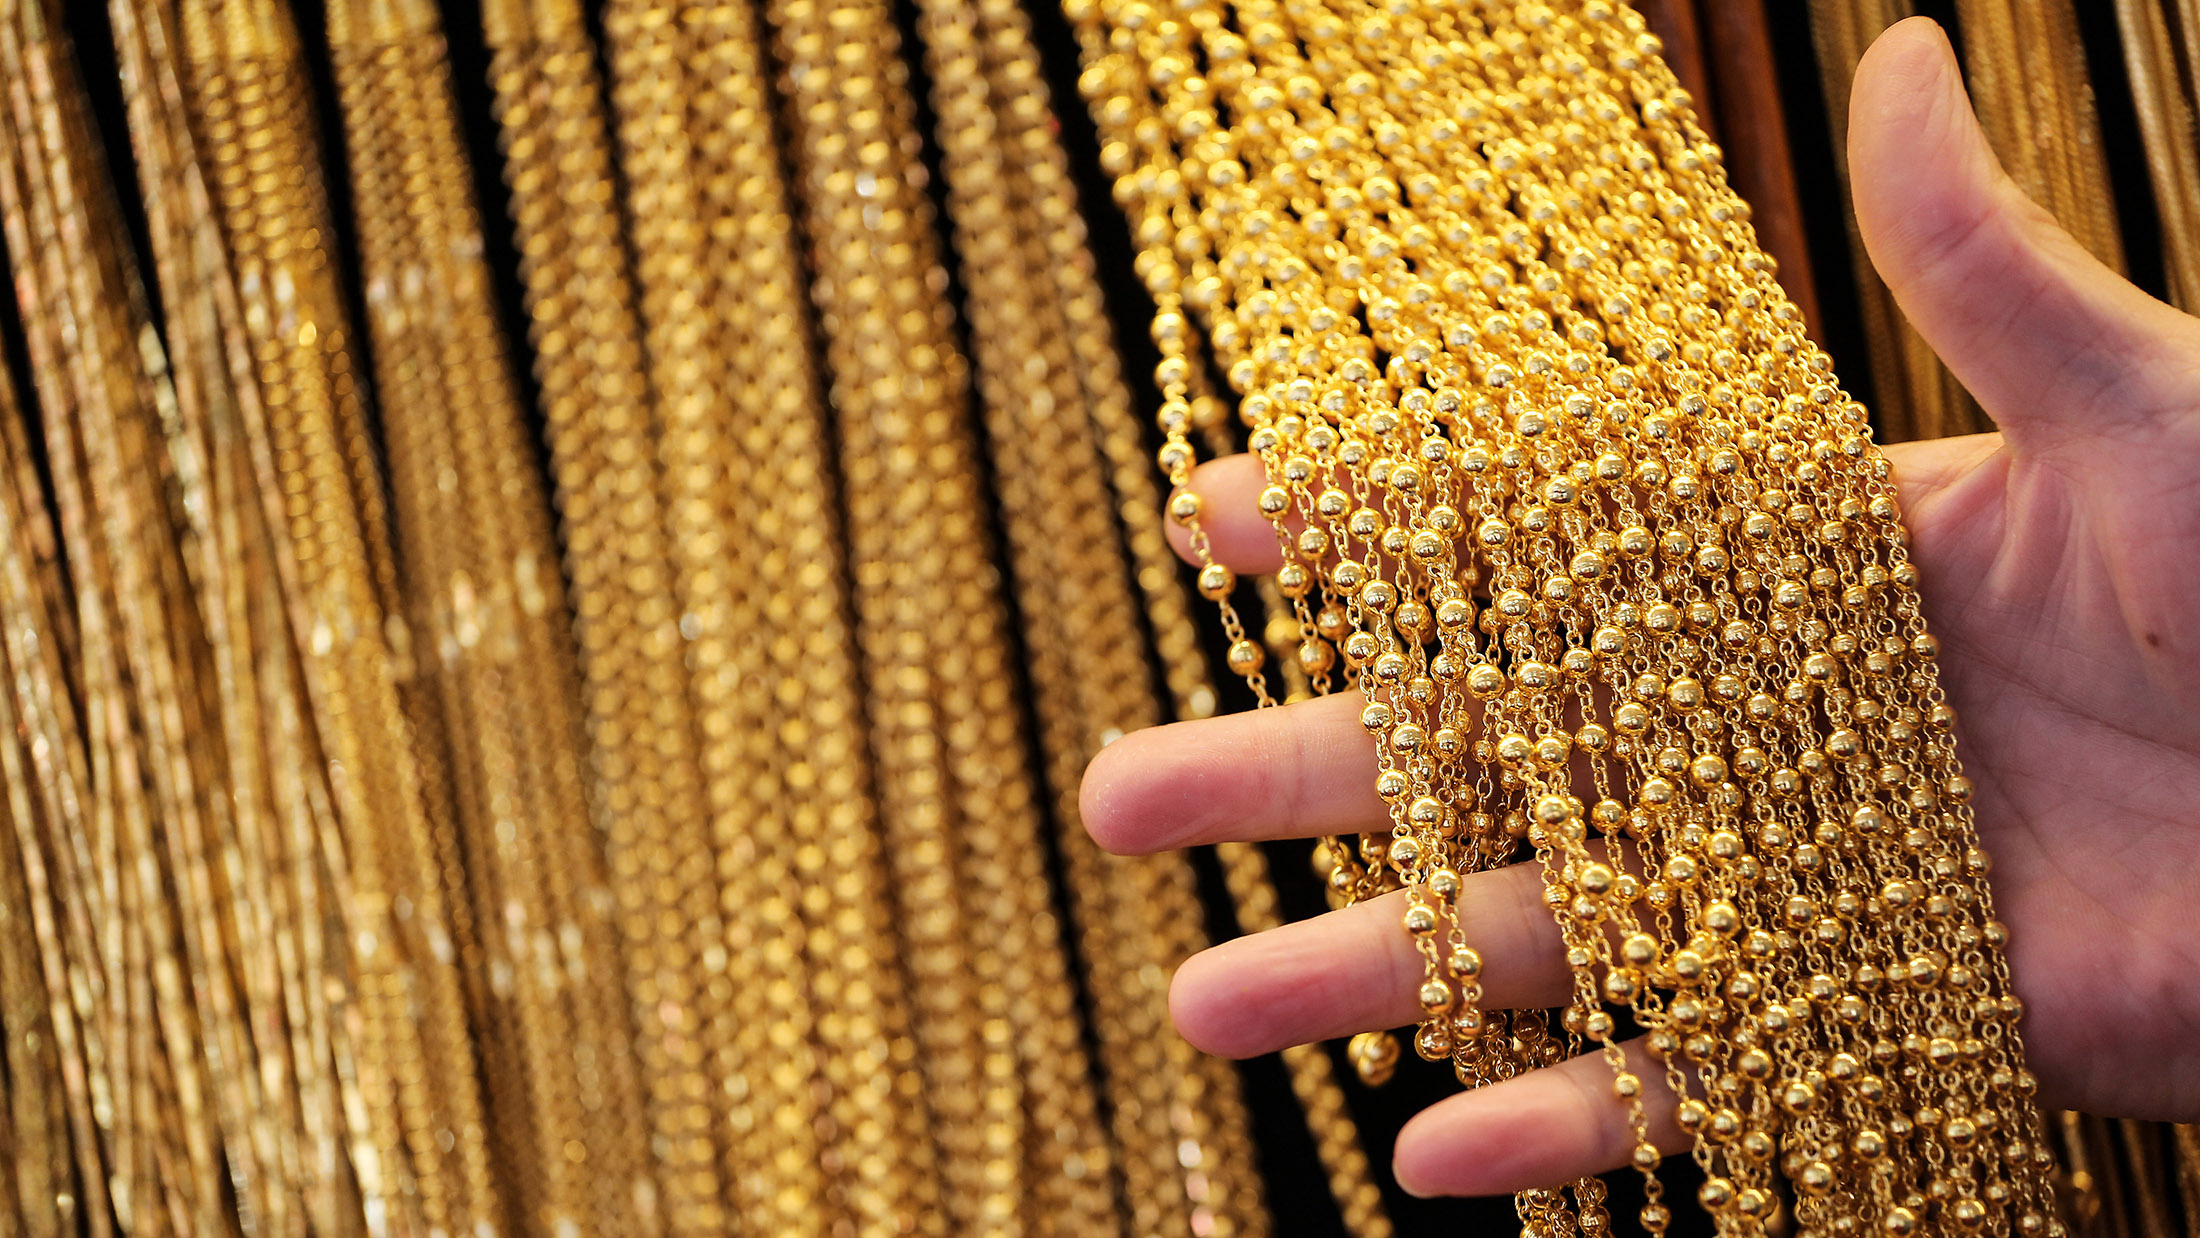 A store assistant handles gold chains hanging from a wall display.
